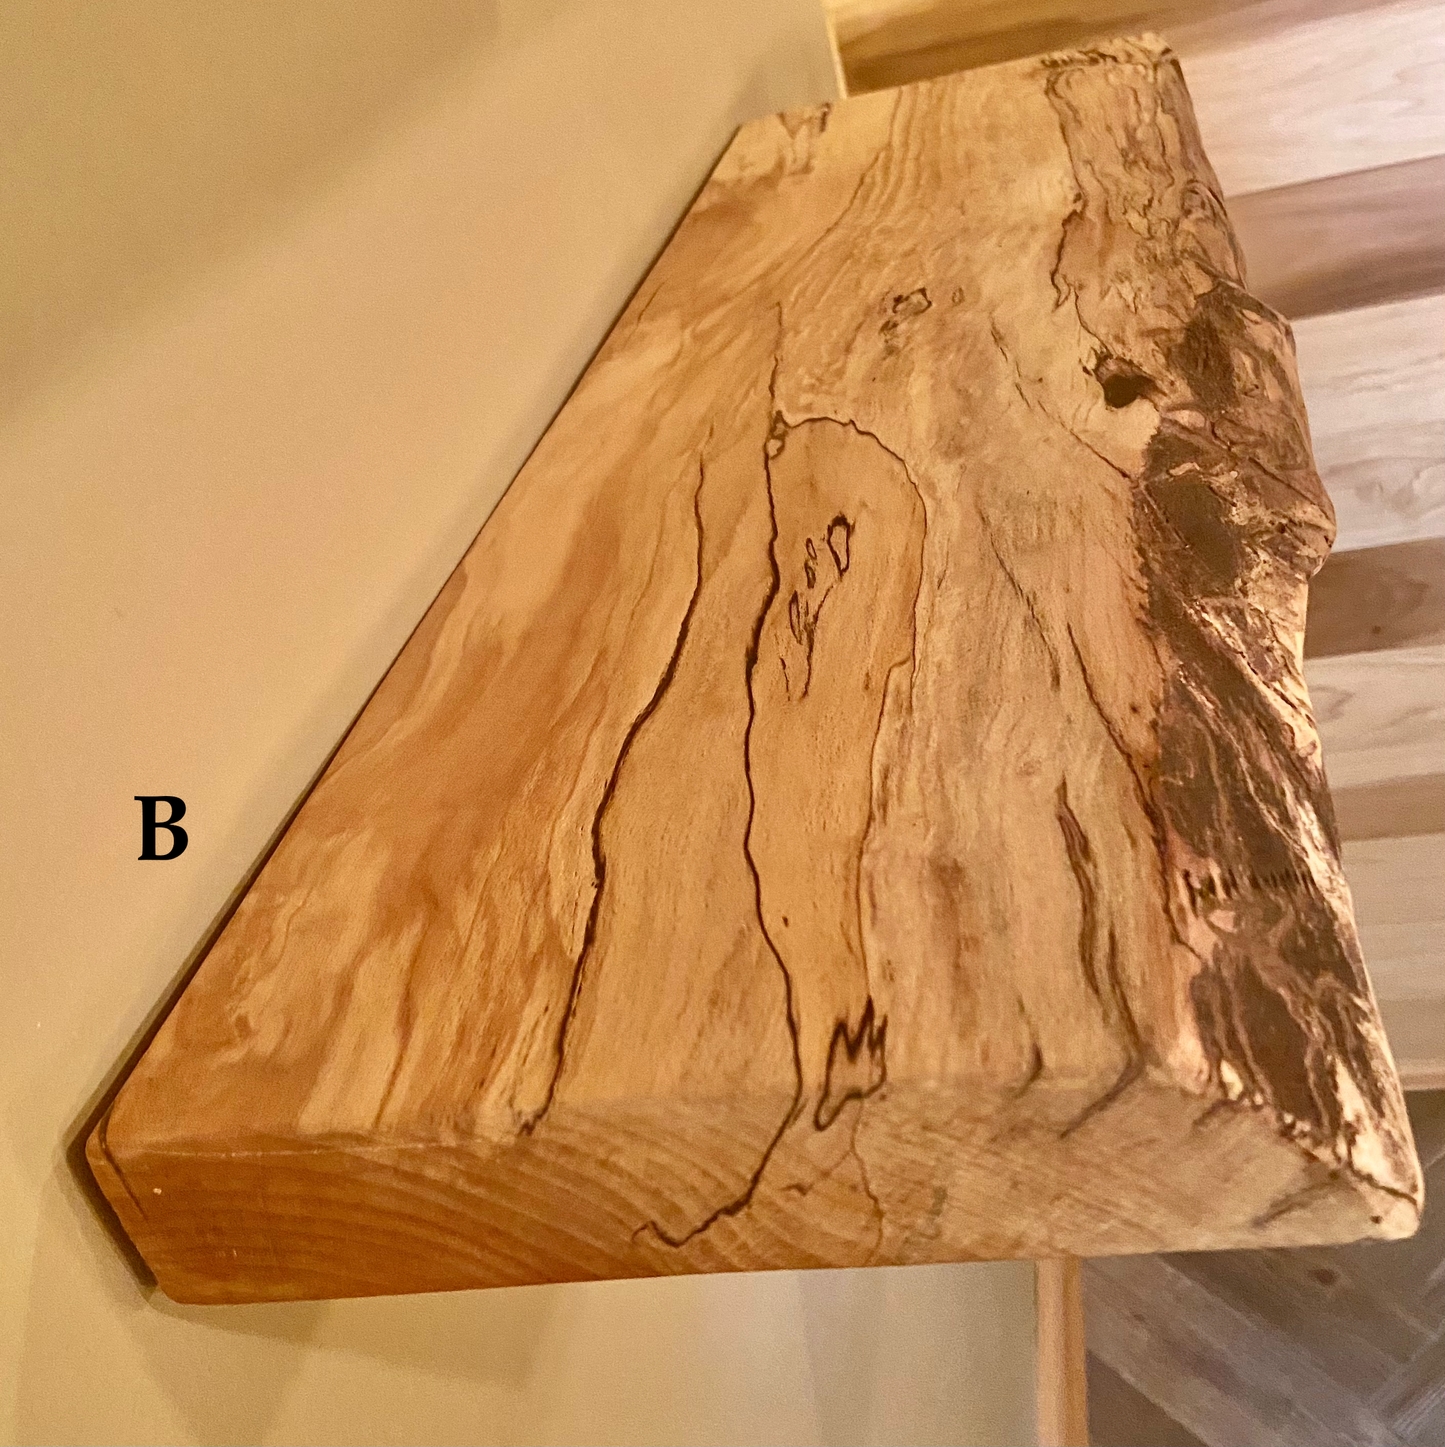 Unique Live Edge Spalted Maple Sycamore Floating Wood Shelves, Live Edge Bookshelf or Live Edge Mantel (SOLD)